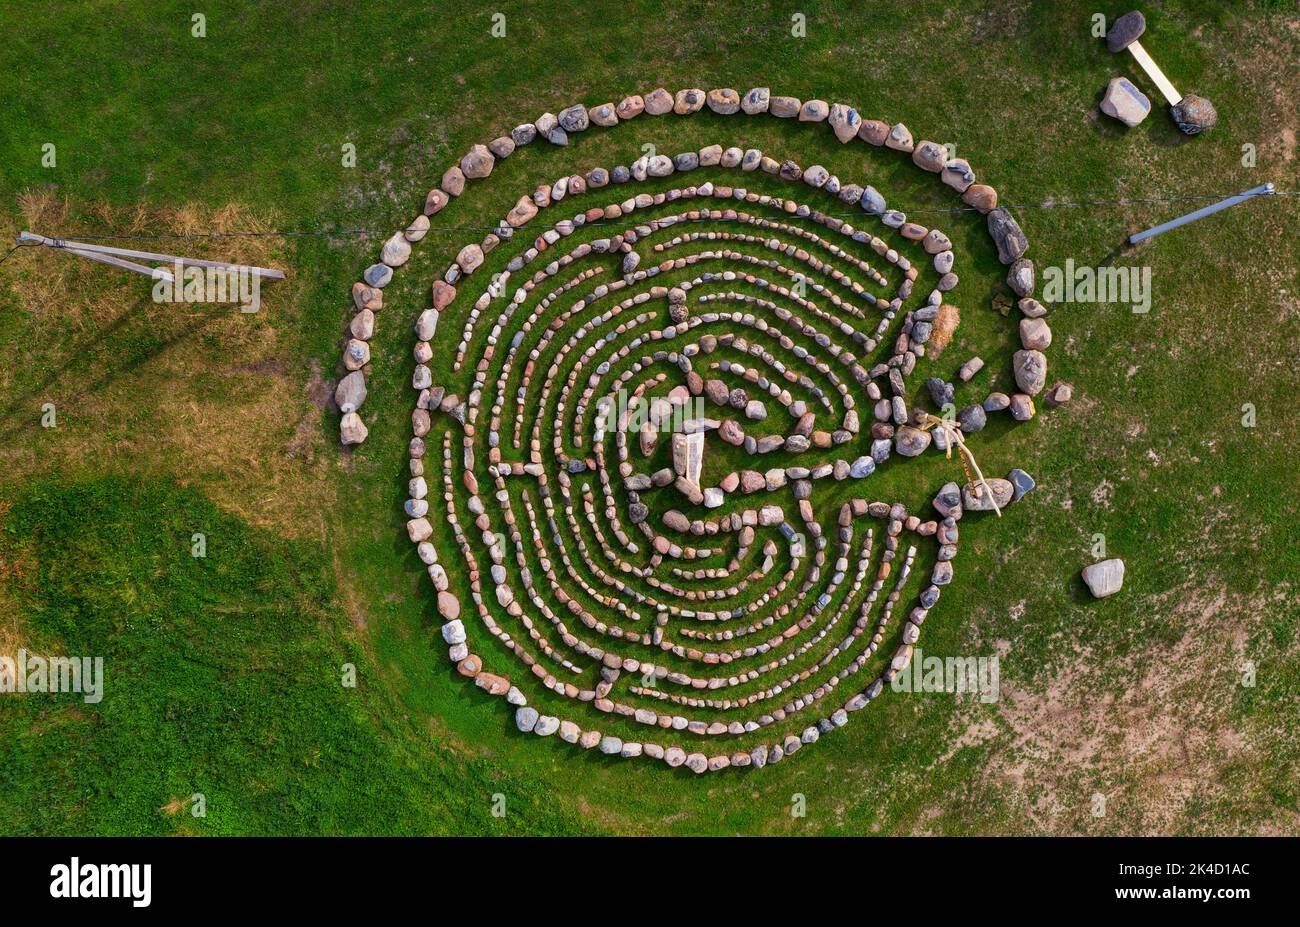 Spiral labyrinth made of stones, Lithuania, aerial view Stock Photo